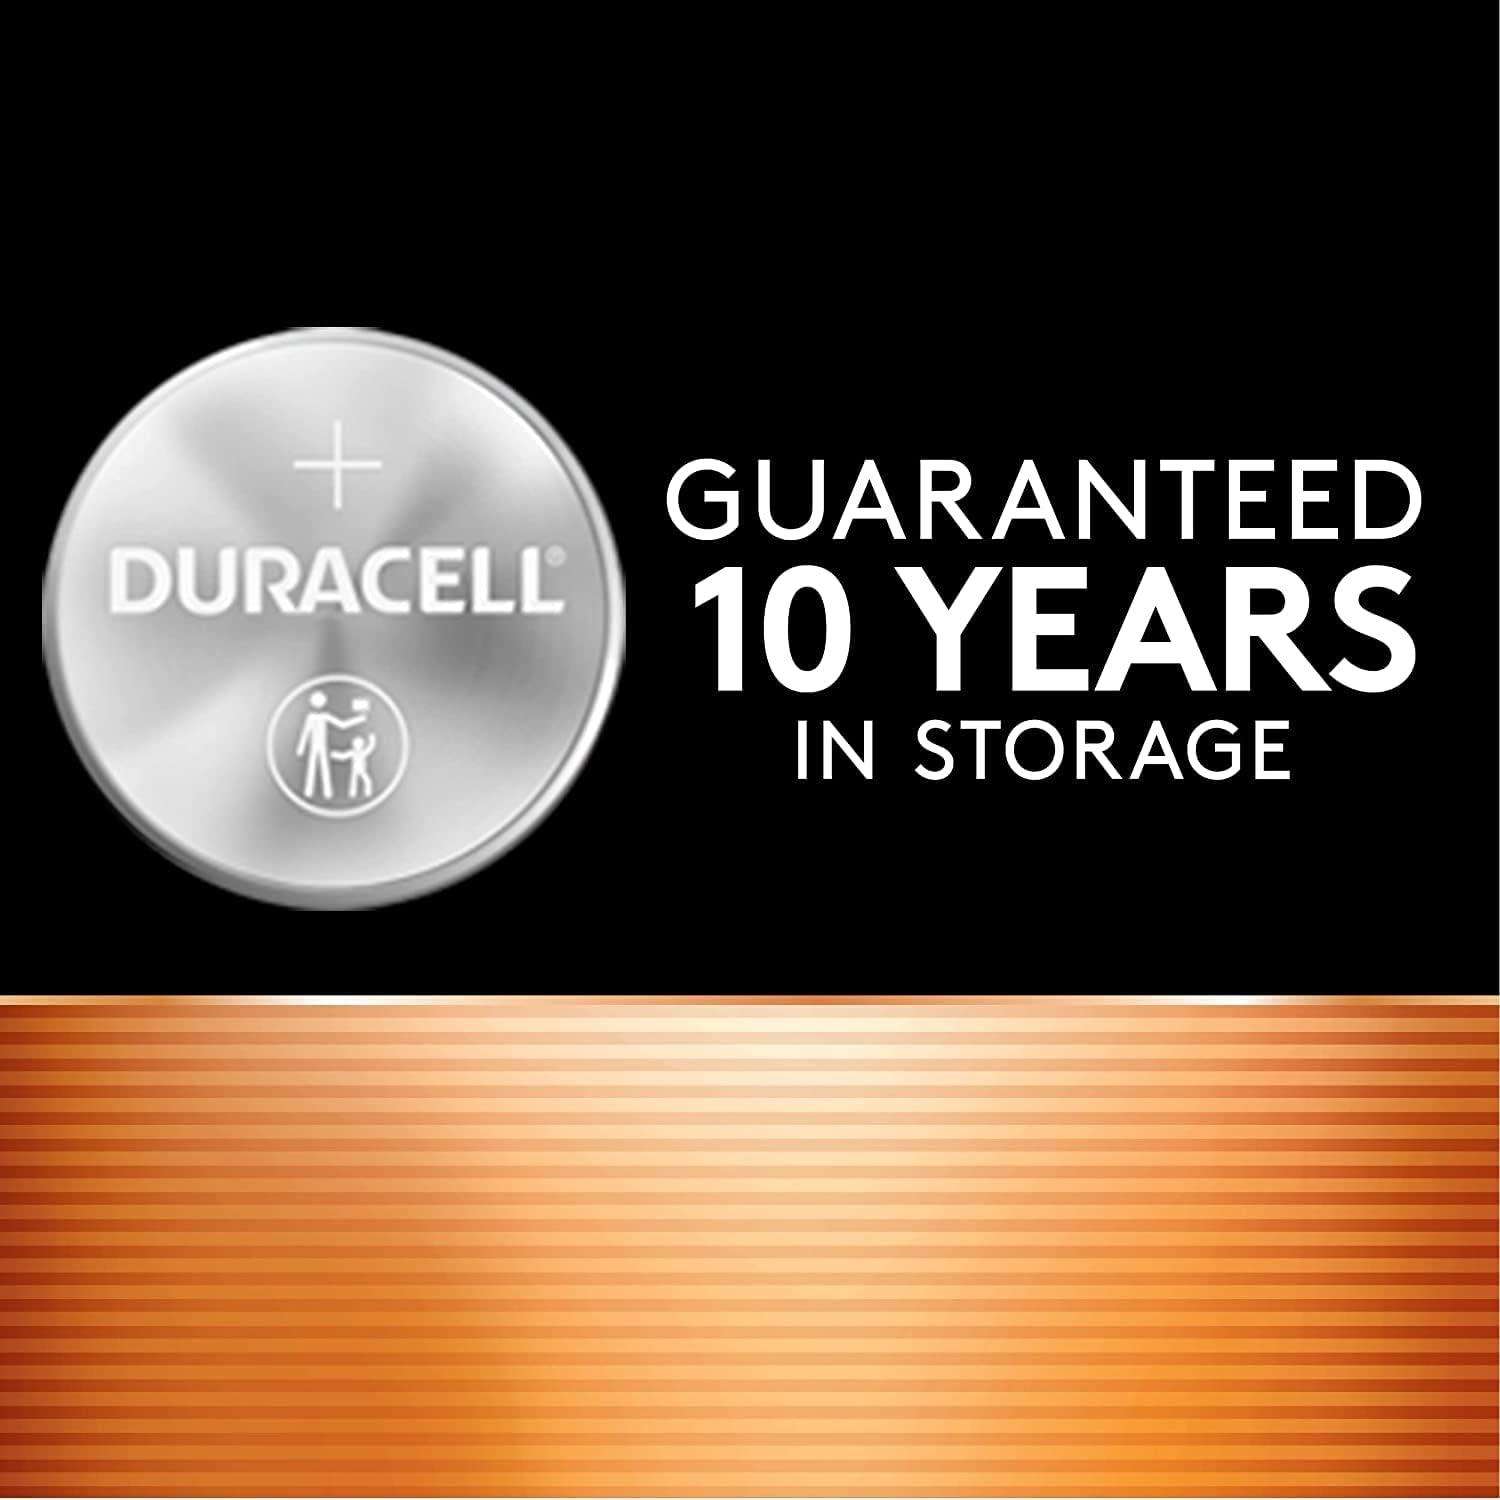 4 x Duracell CR2032 3V Lithium Coin Cell Battery 2032 button